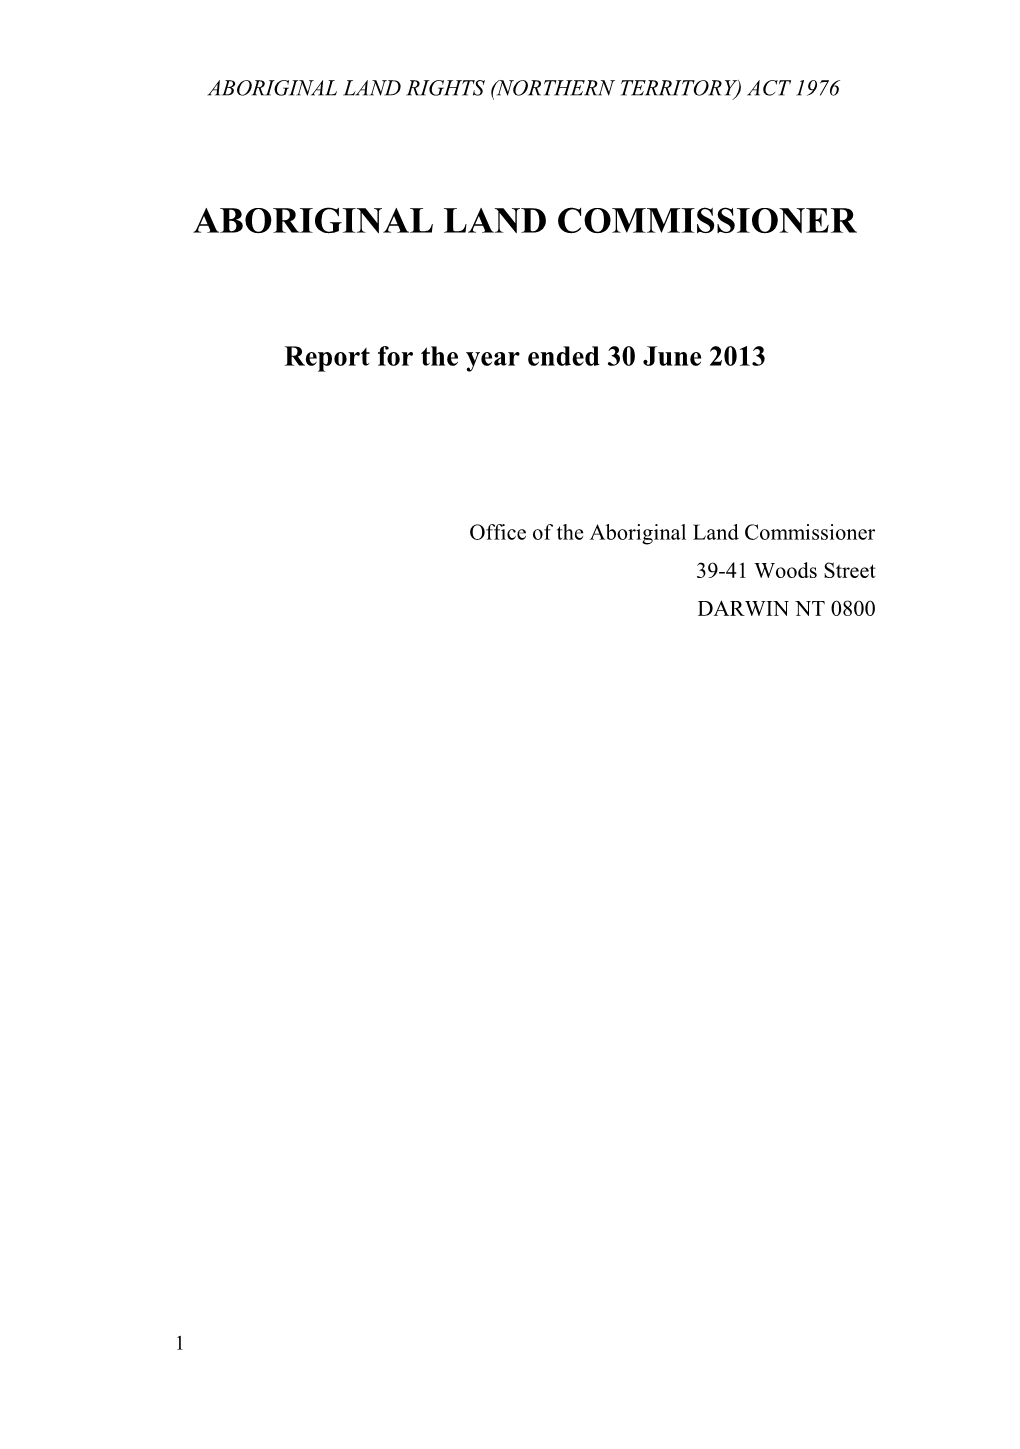 Aboriginal Land Rights (Northern Territory) Act 1976